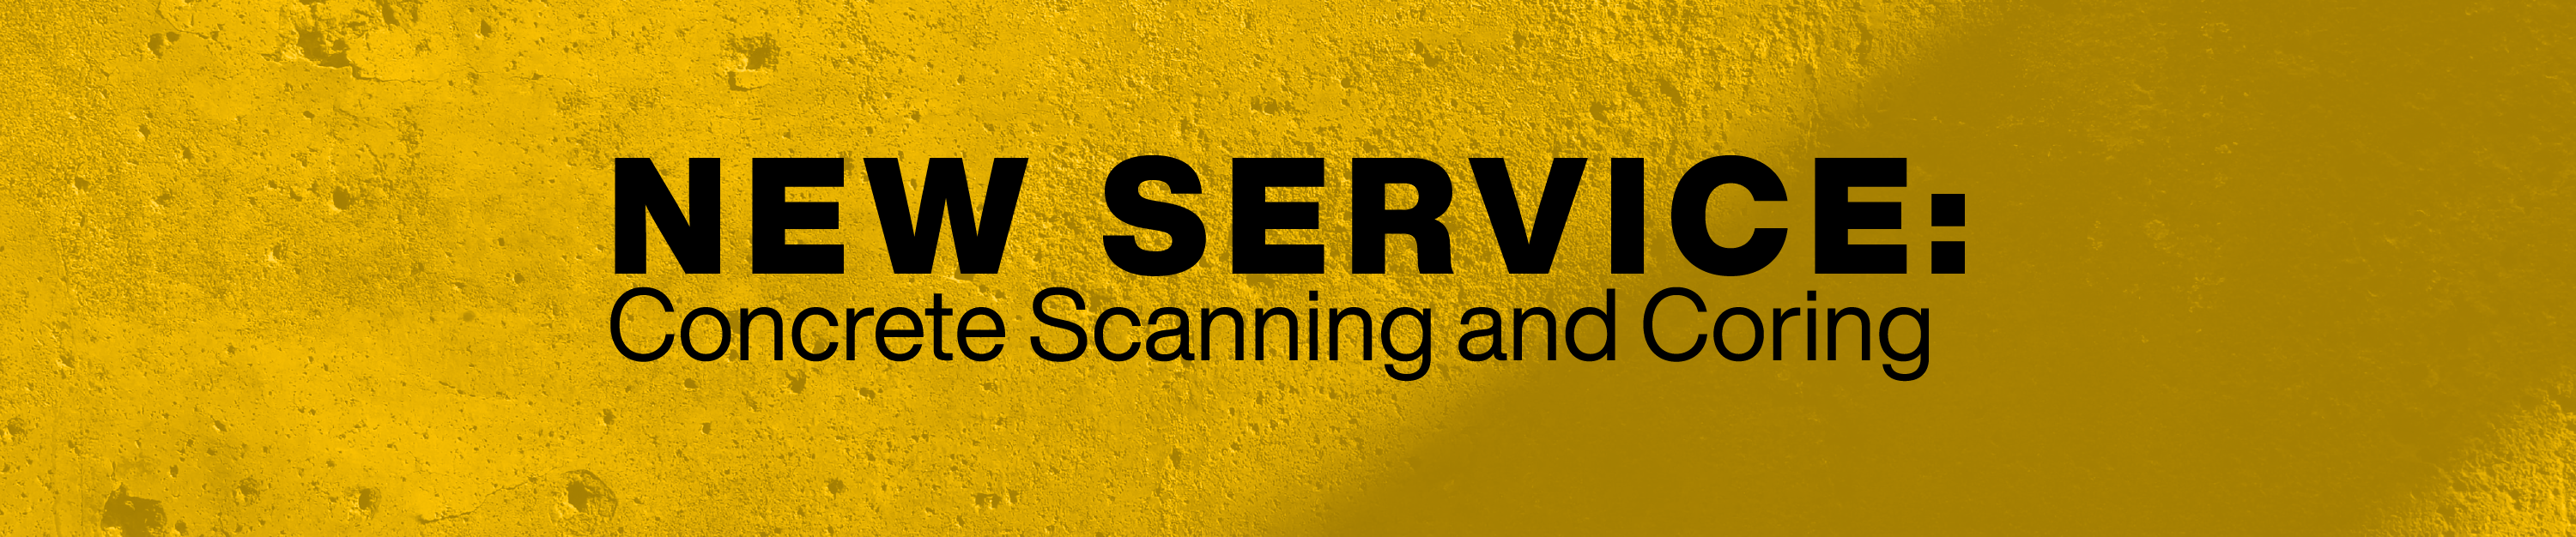 NEW SERVICE: Concrete Scanning and Coring